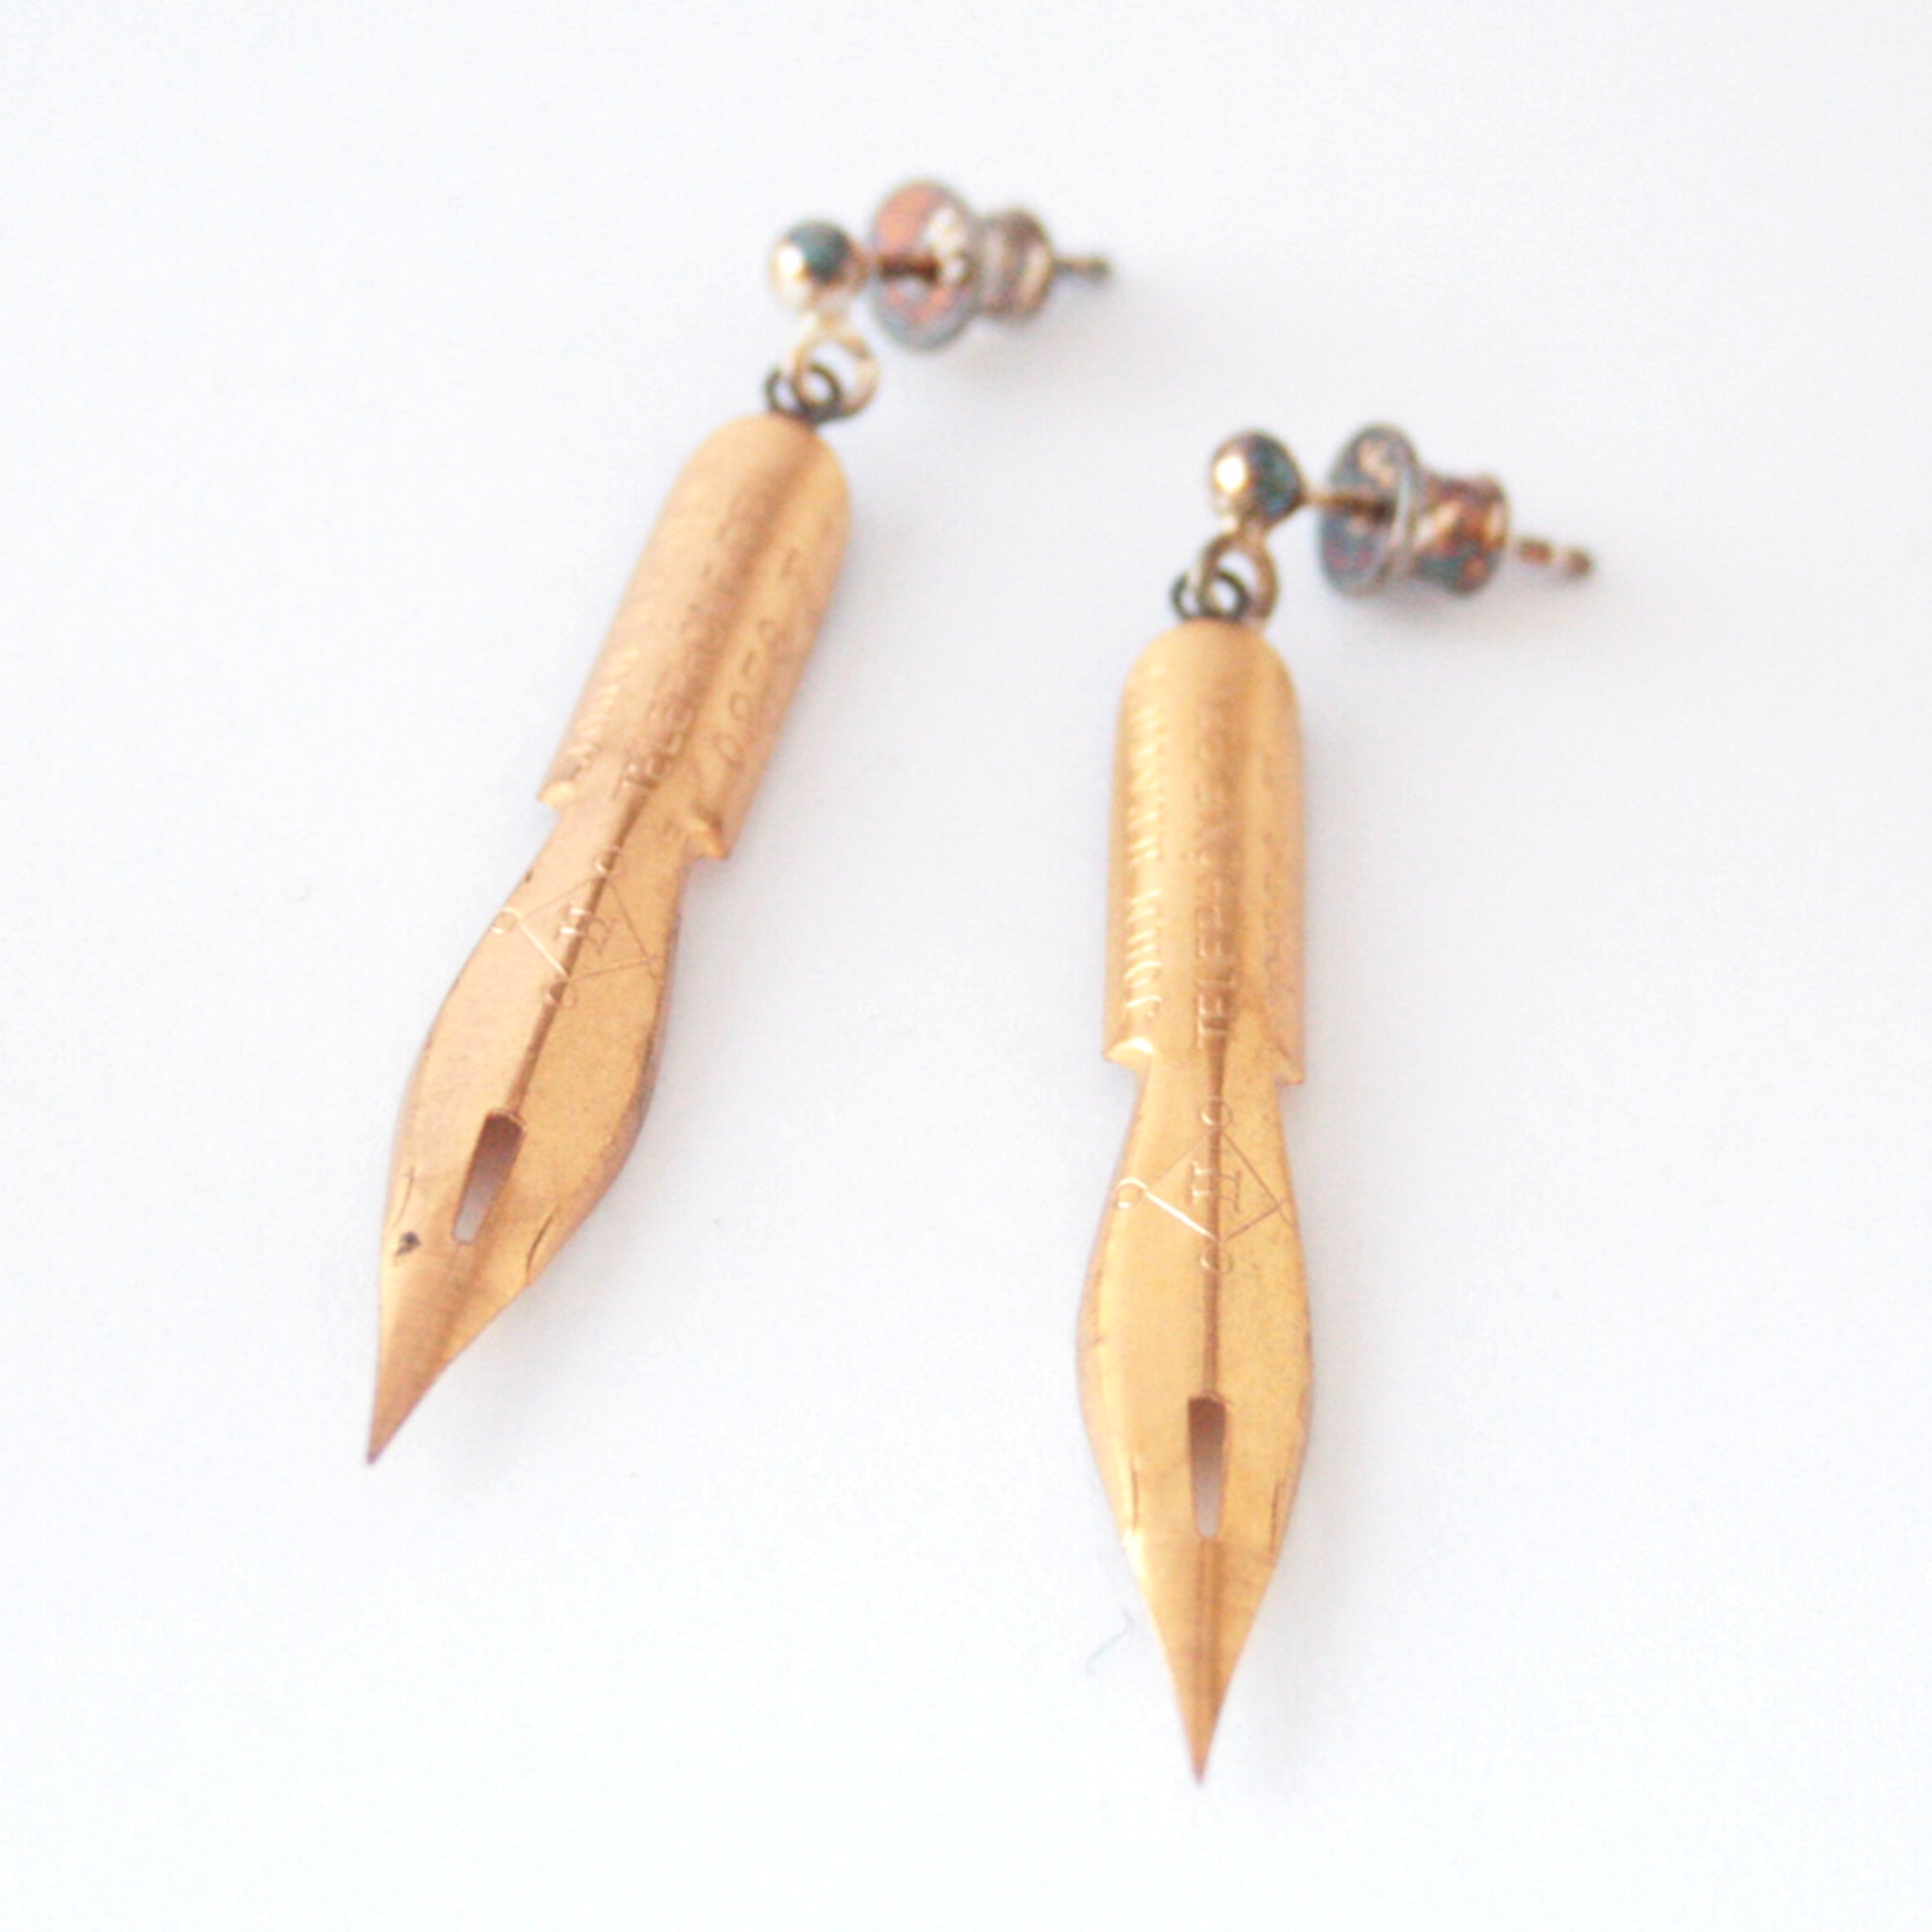 gold earrings made of real pen nibs lying on a white paper